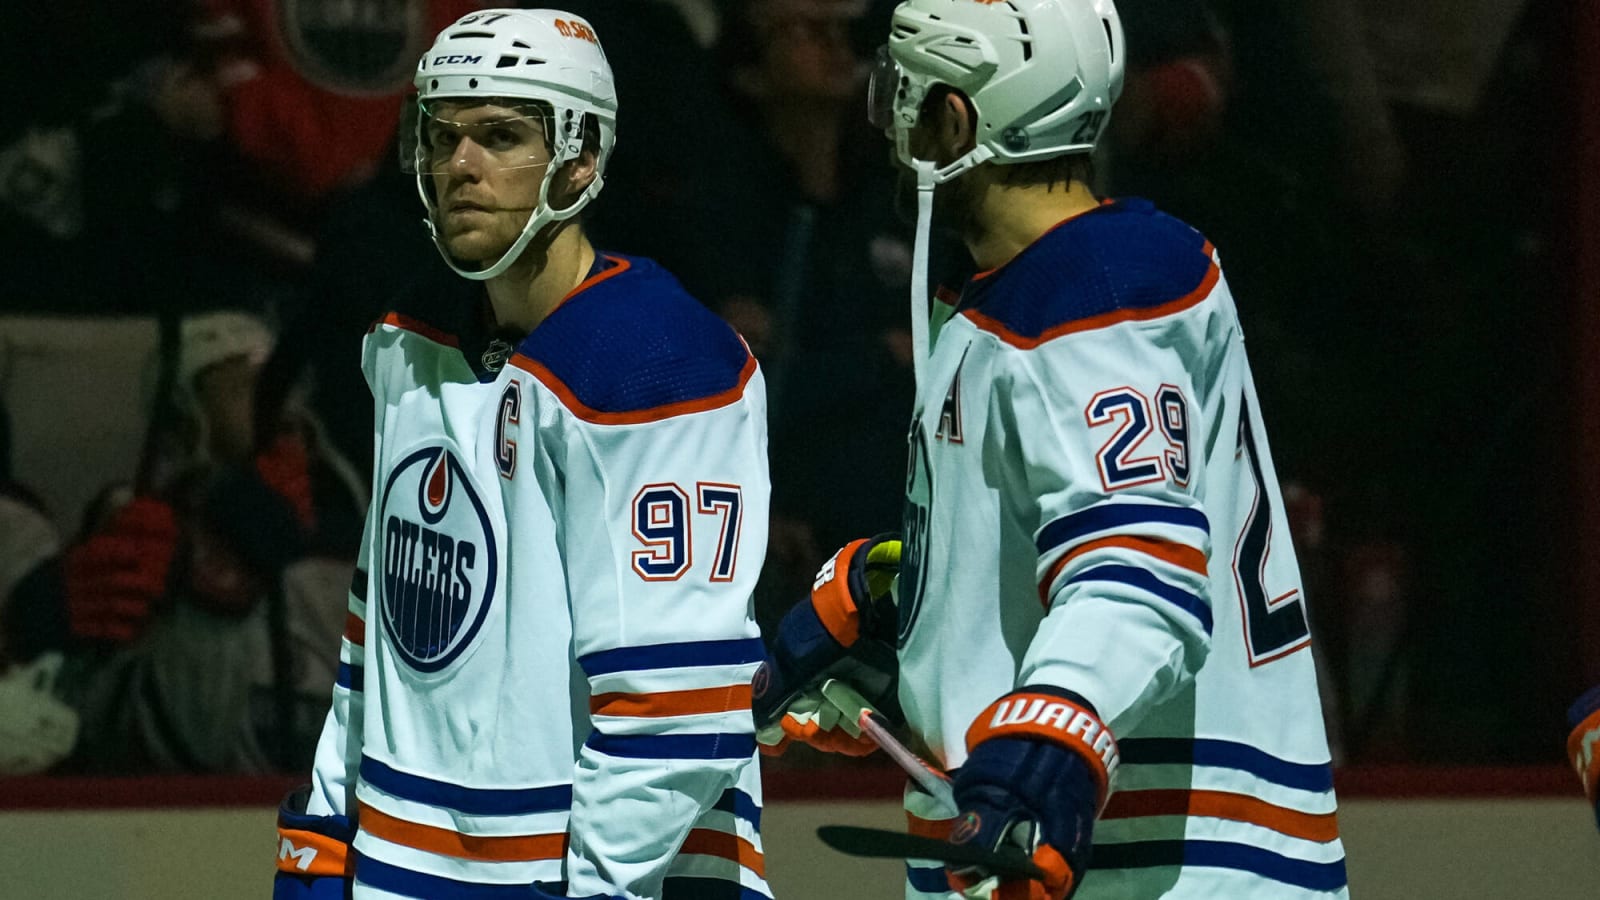 Could Less Be More for McDavid and Draisaitl?